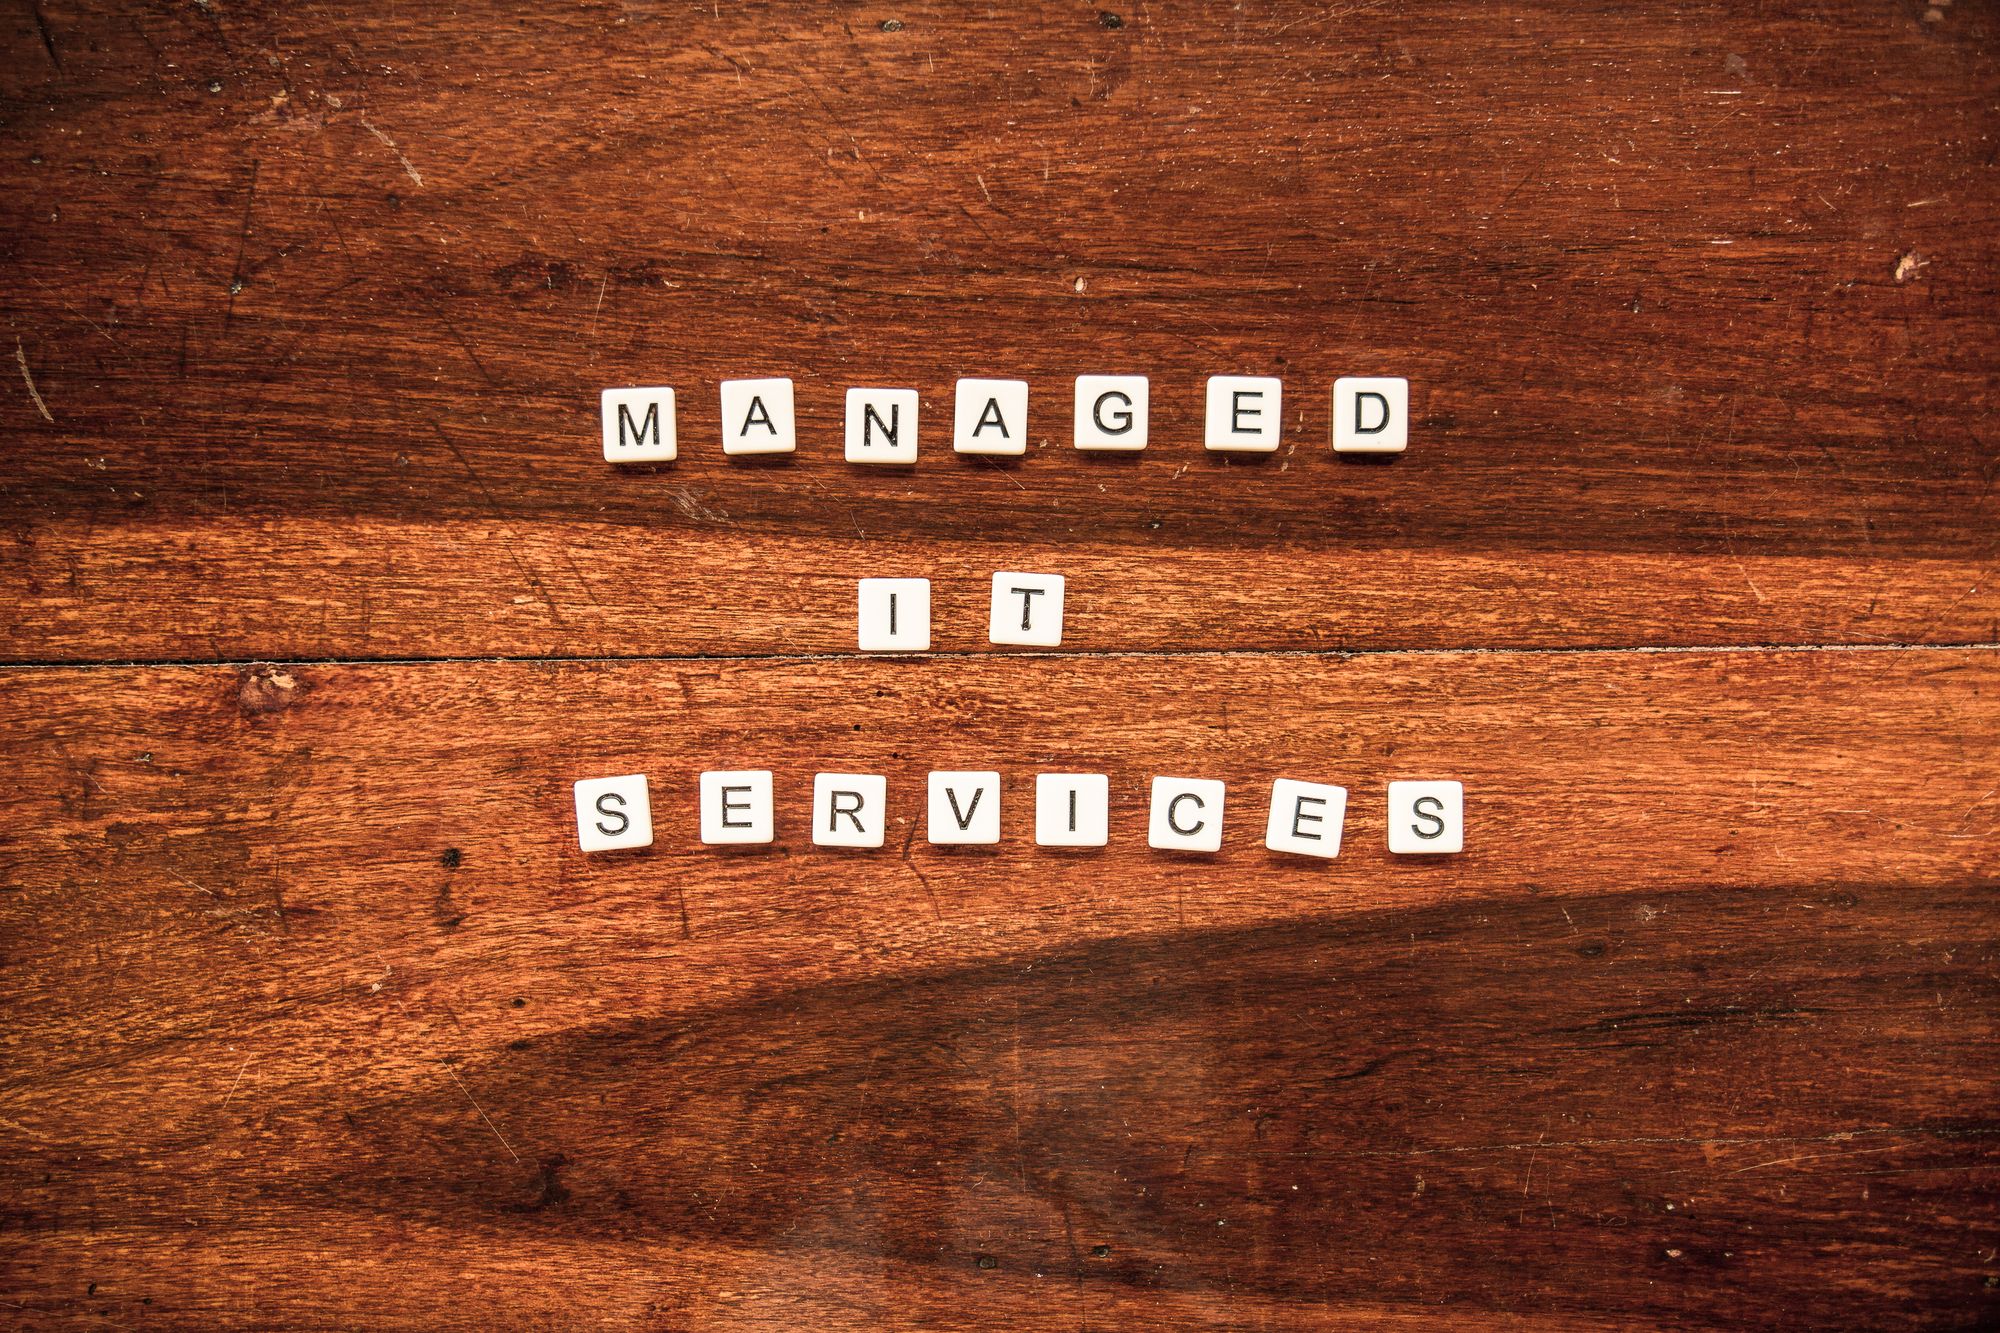 What Your Business Can Expect From Managed IT Services